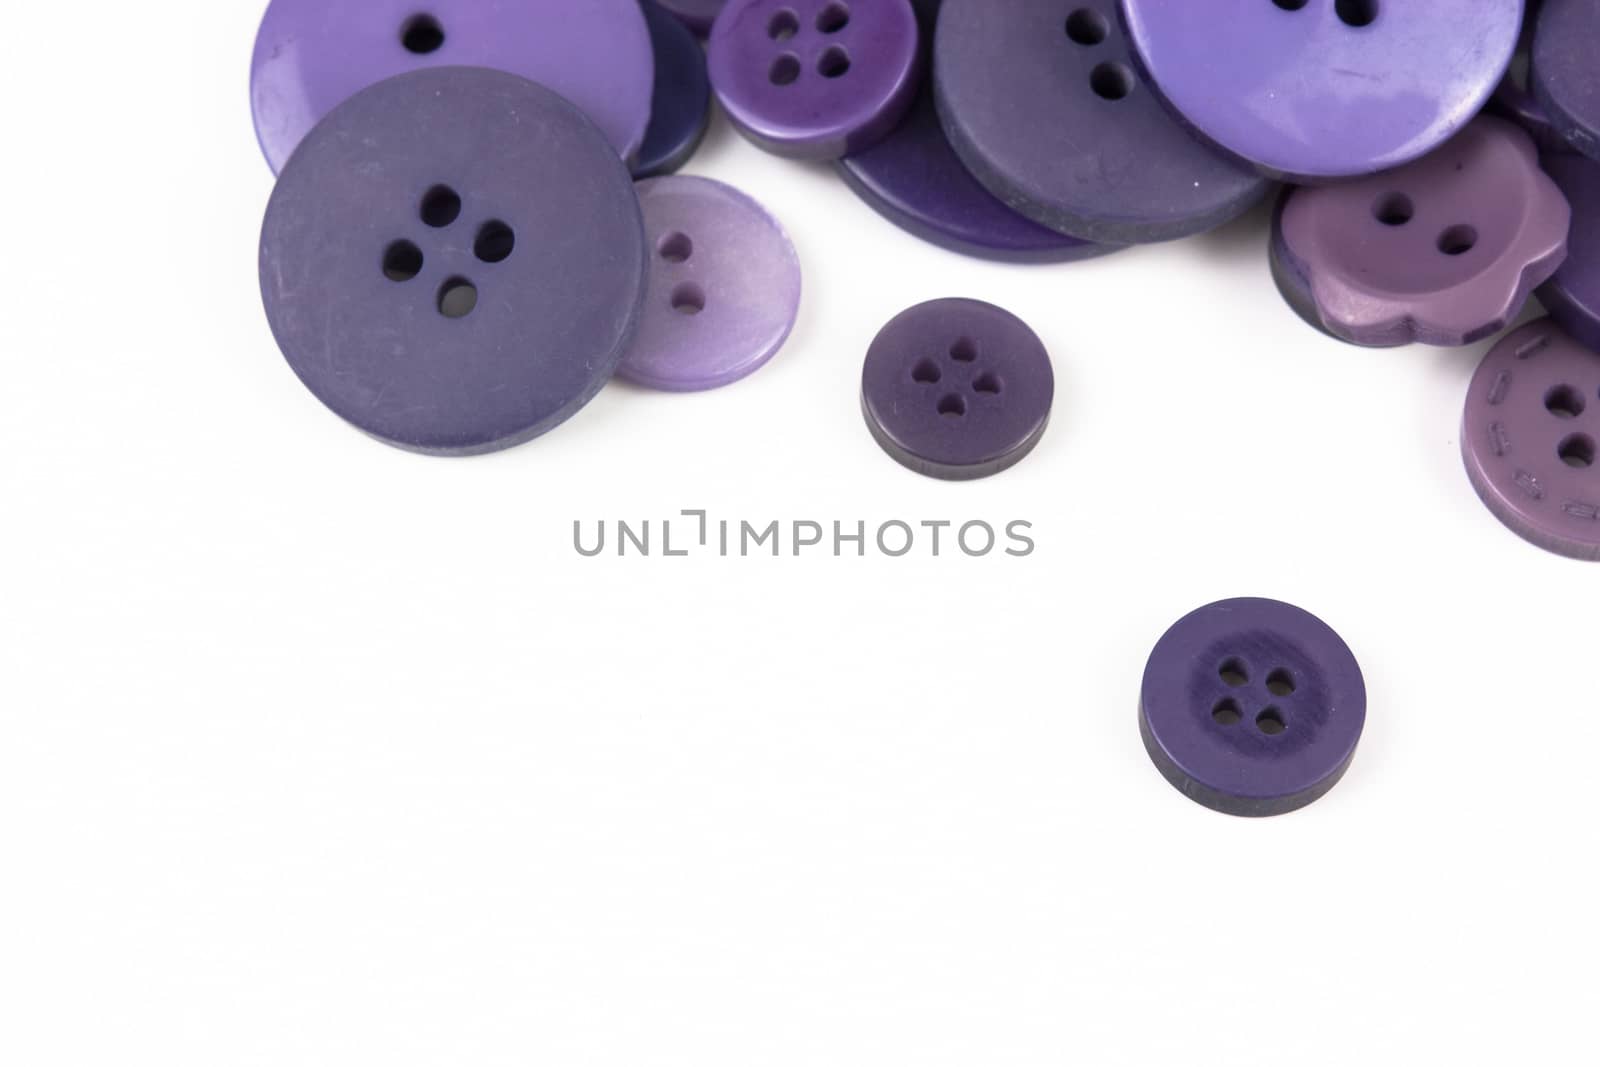 Selection selection of various purple buttons by christopherhall